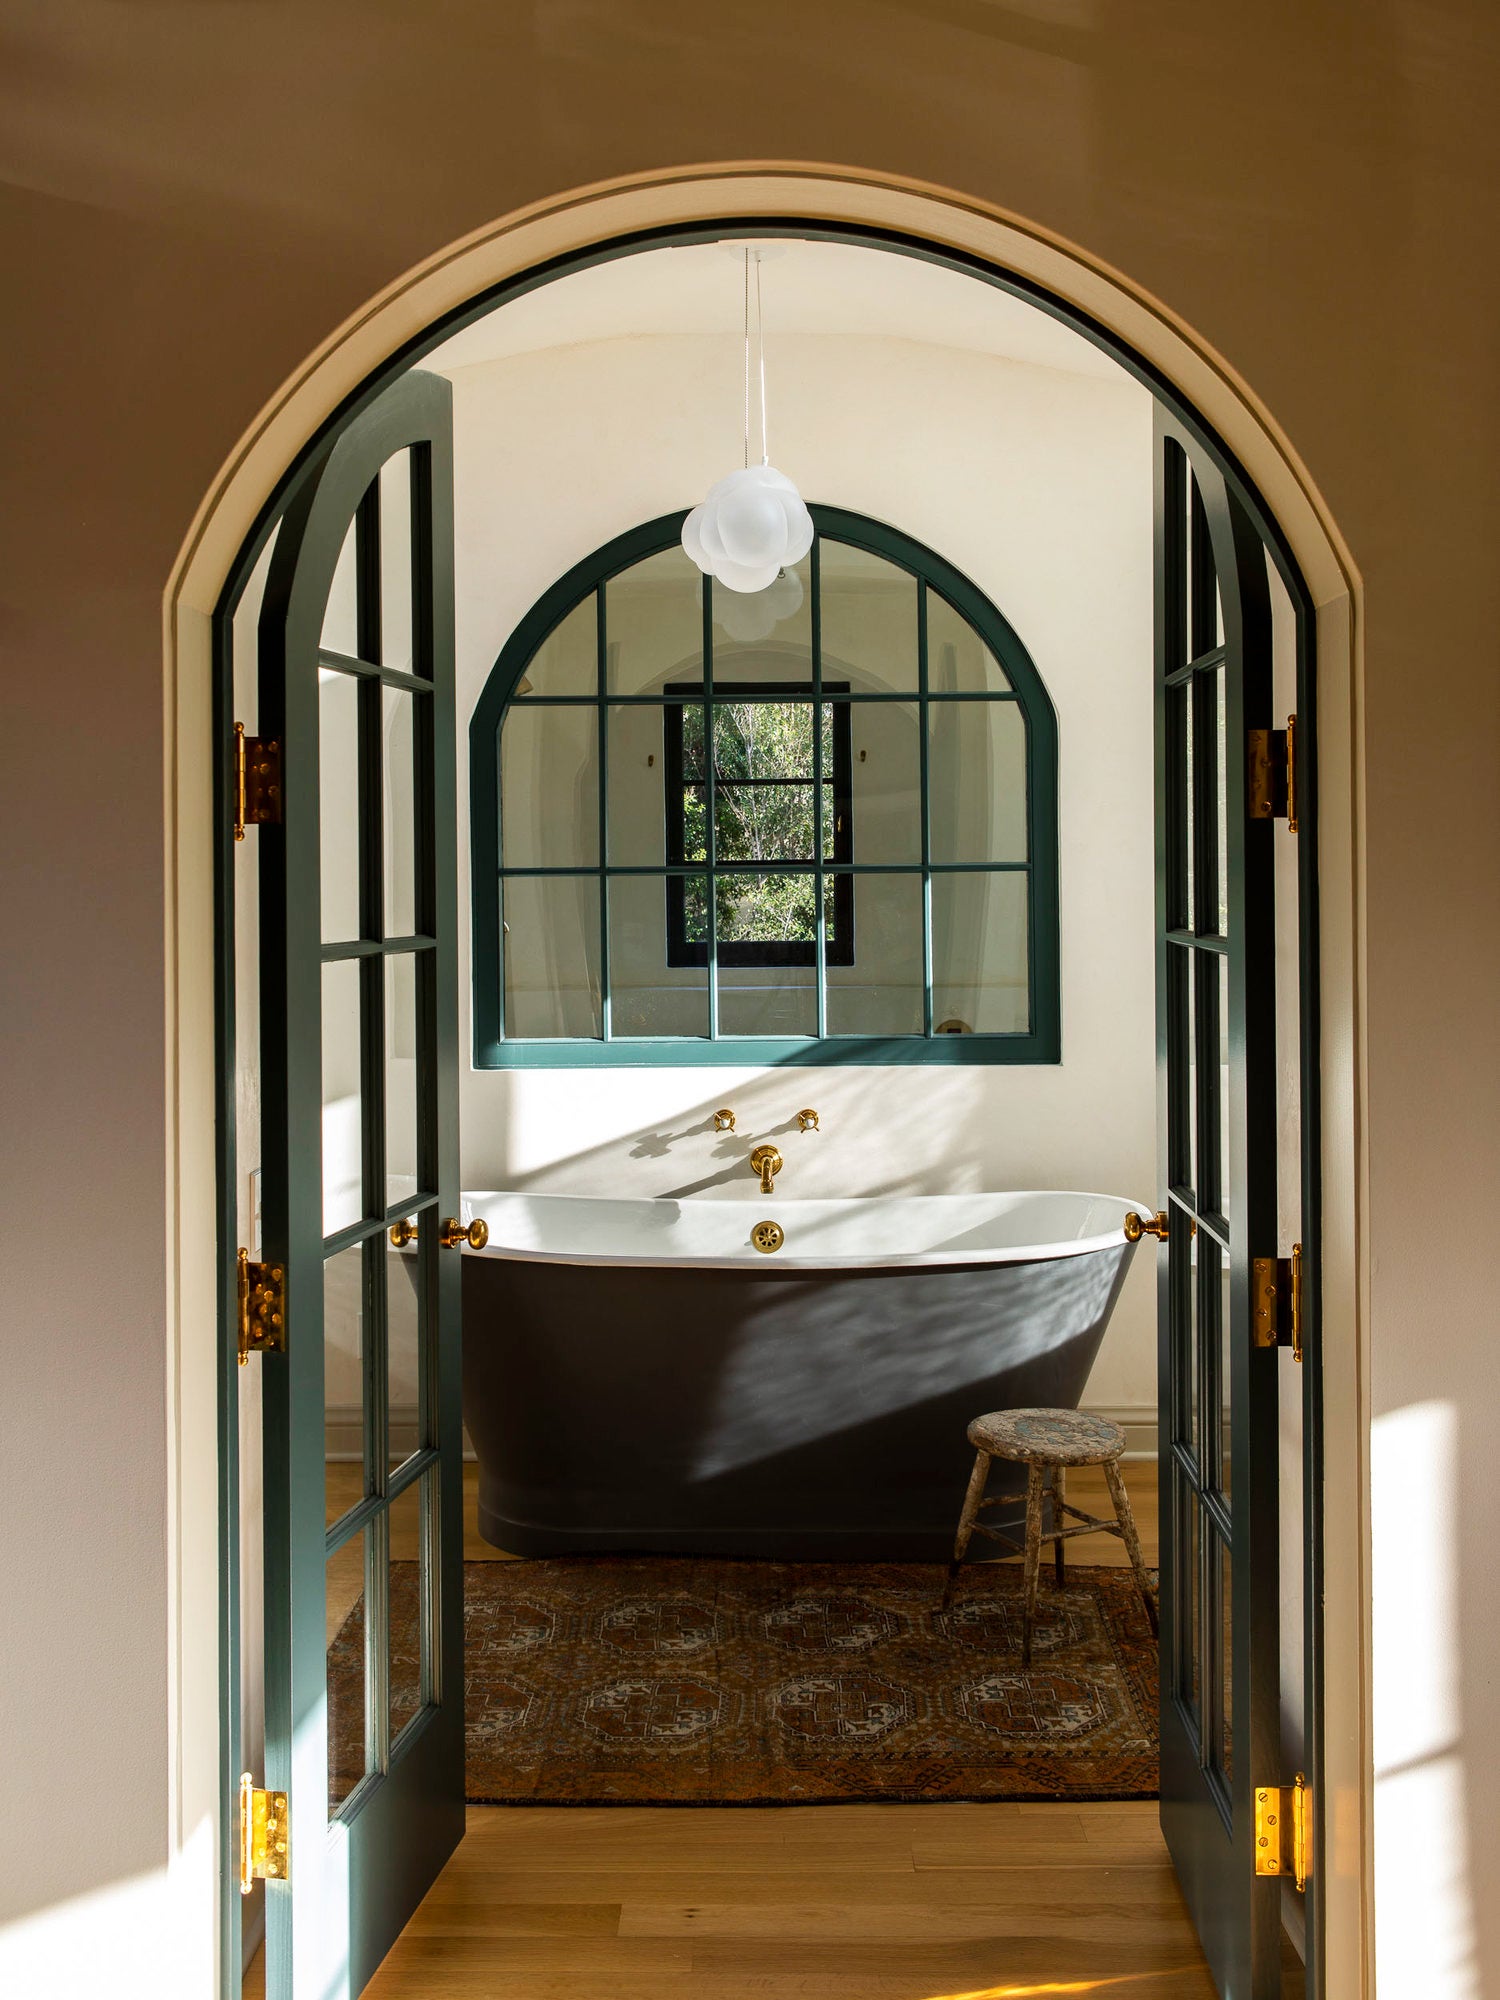 Arched doorway with soaking tub